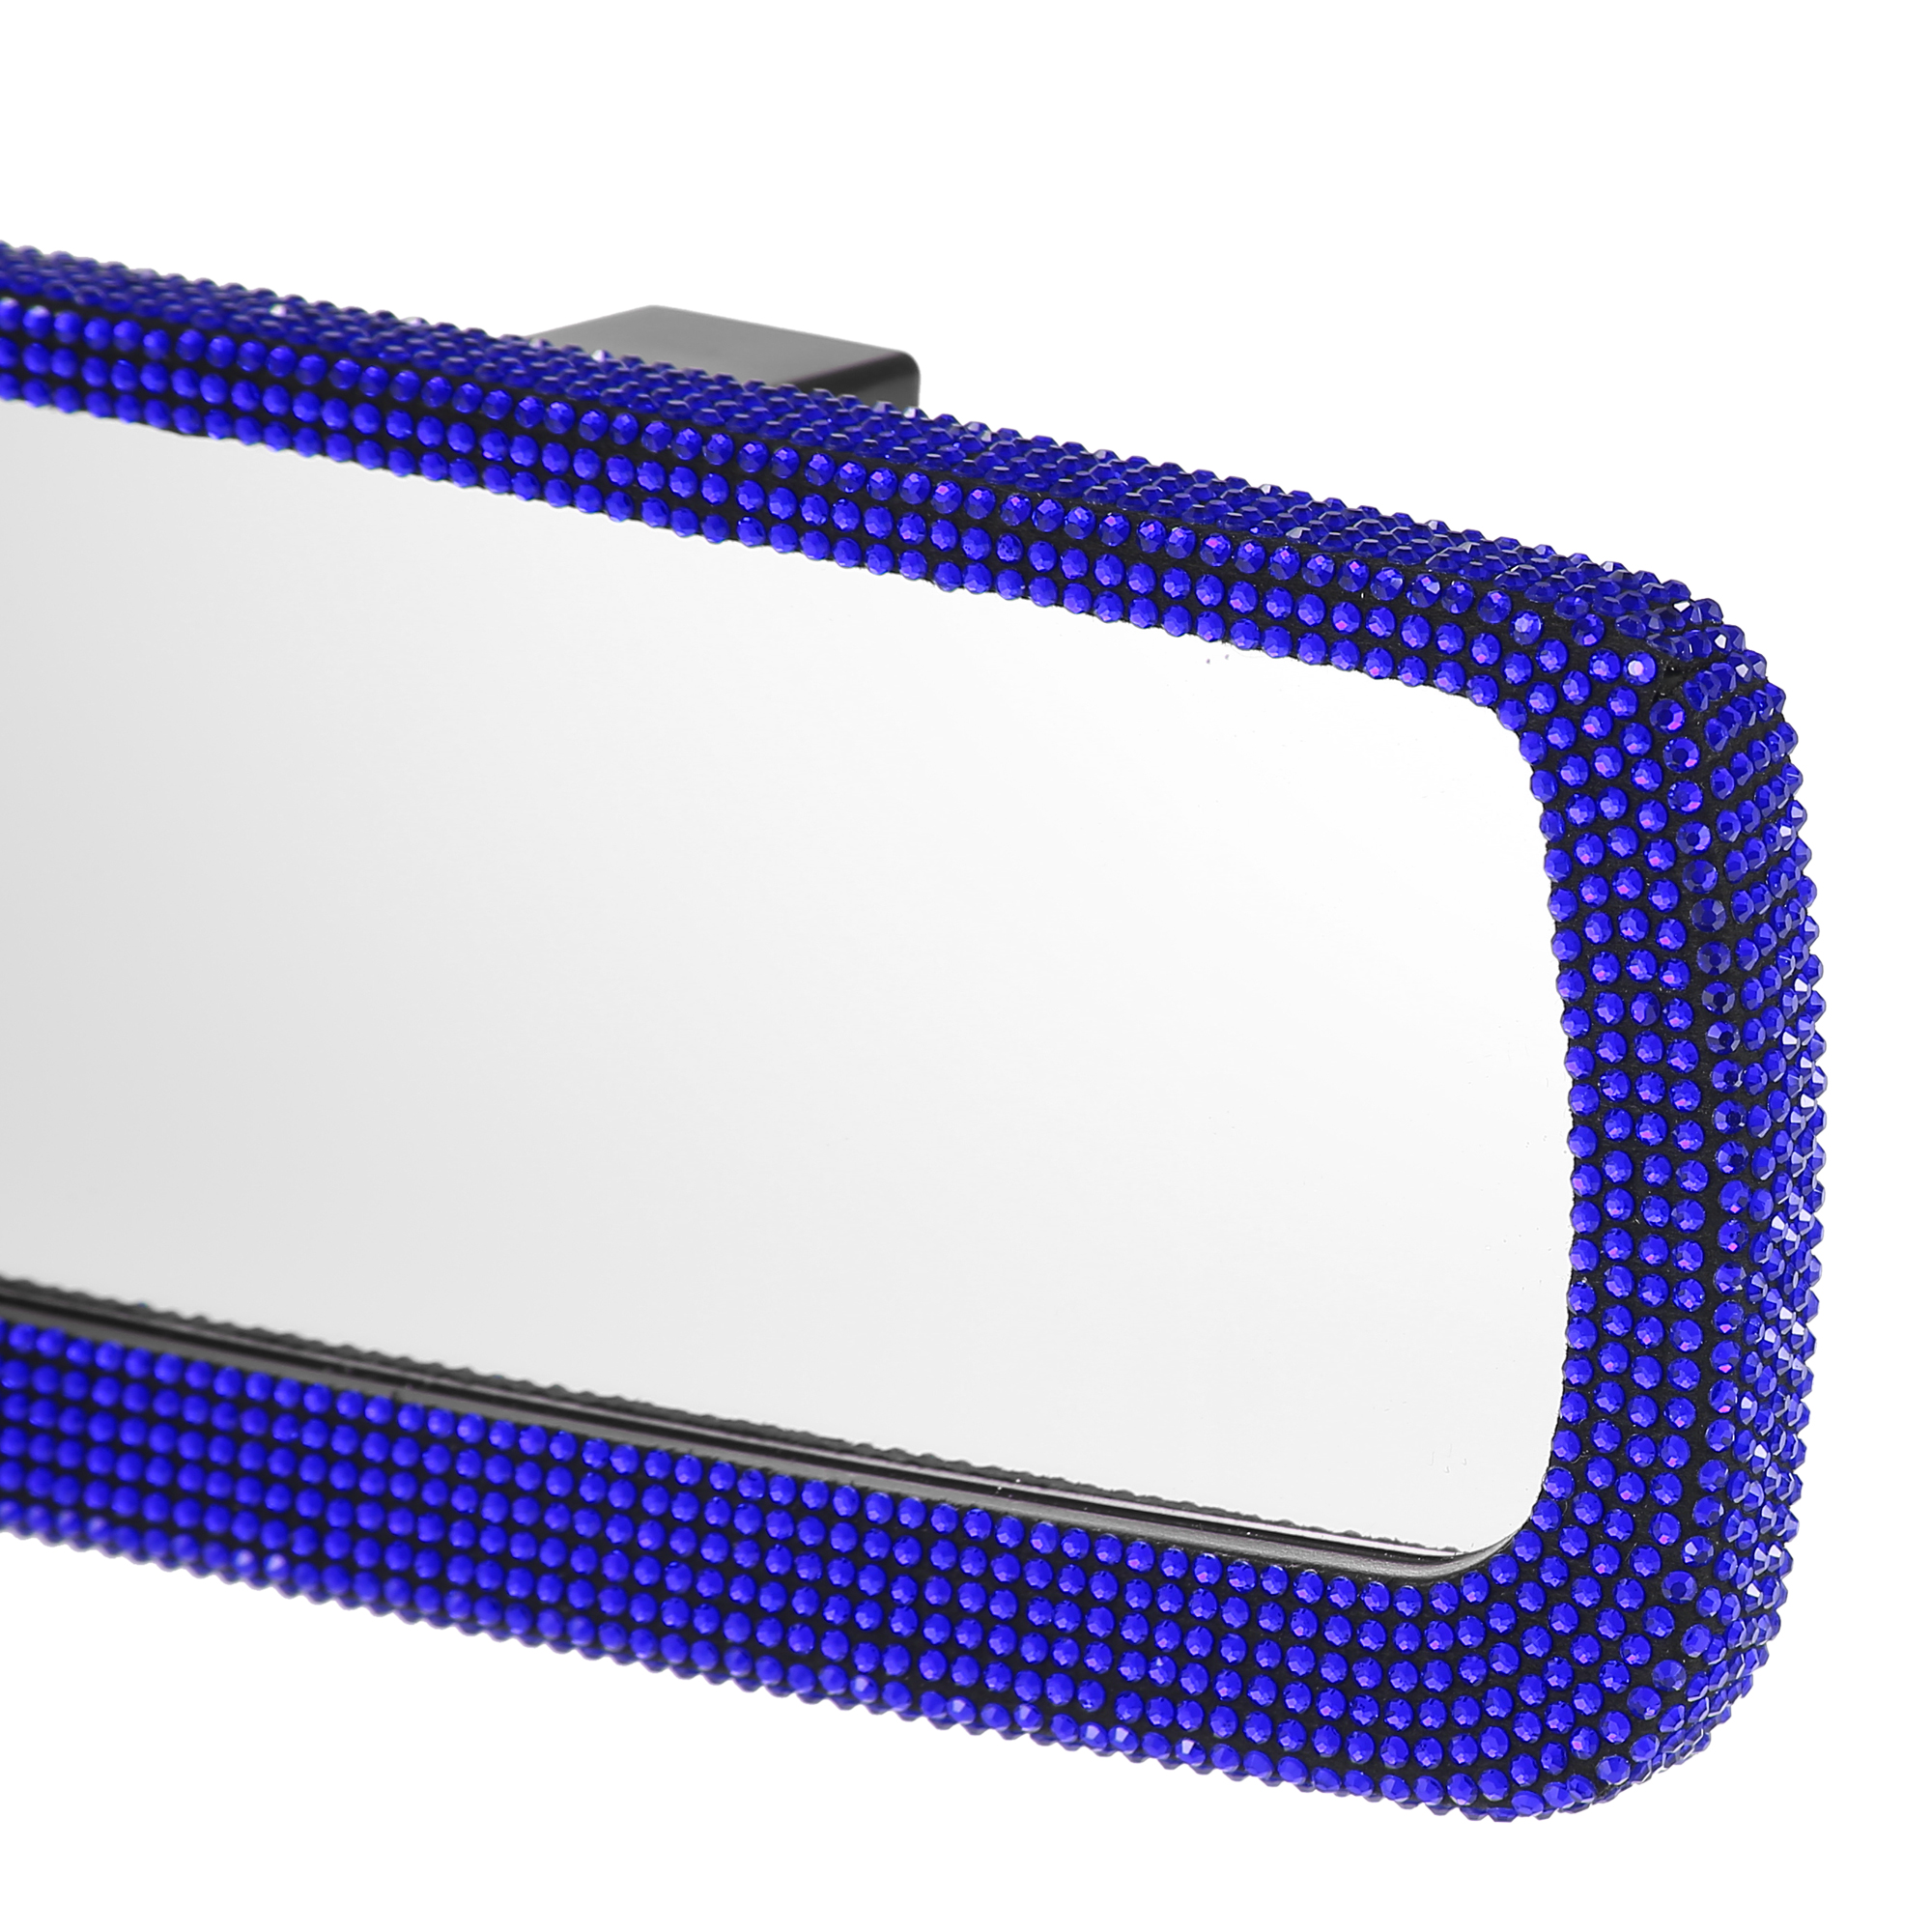 Unique Bargains Bling Car Rear View Mirror with Faux Crystal Rhinestone Interior for Women Blue